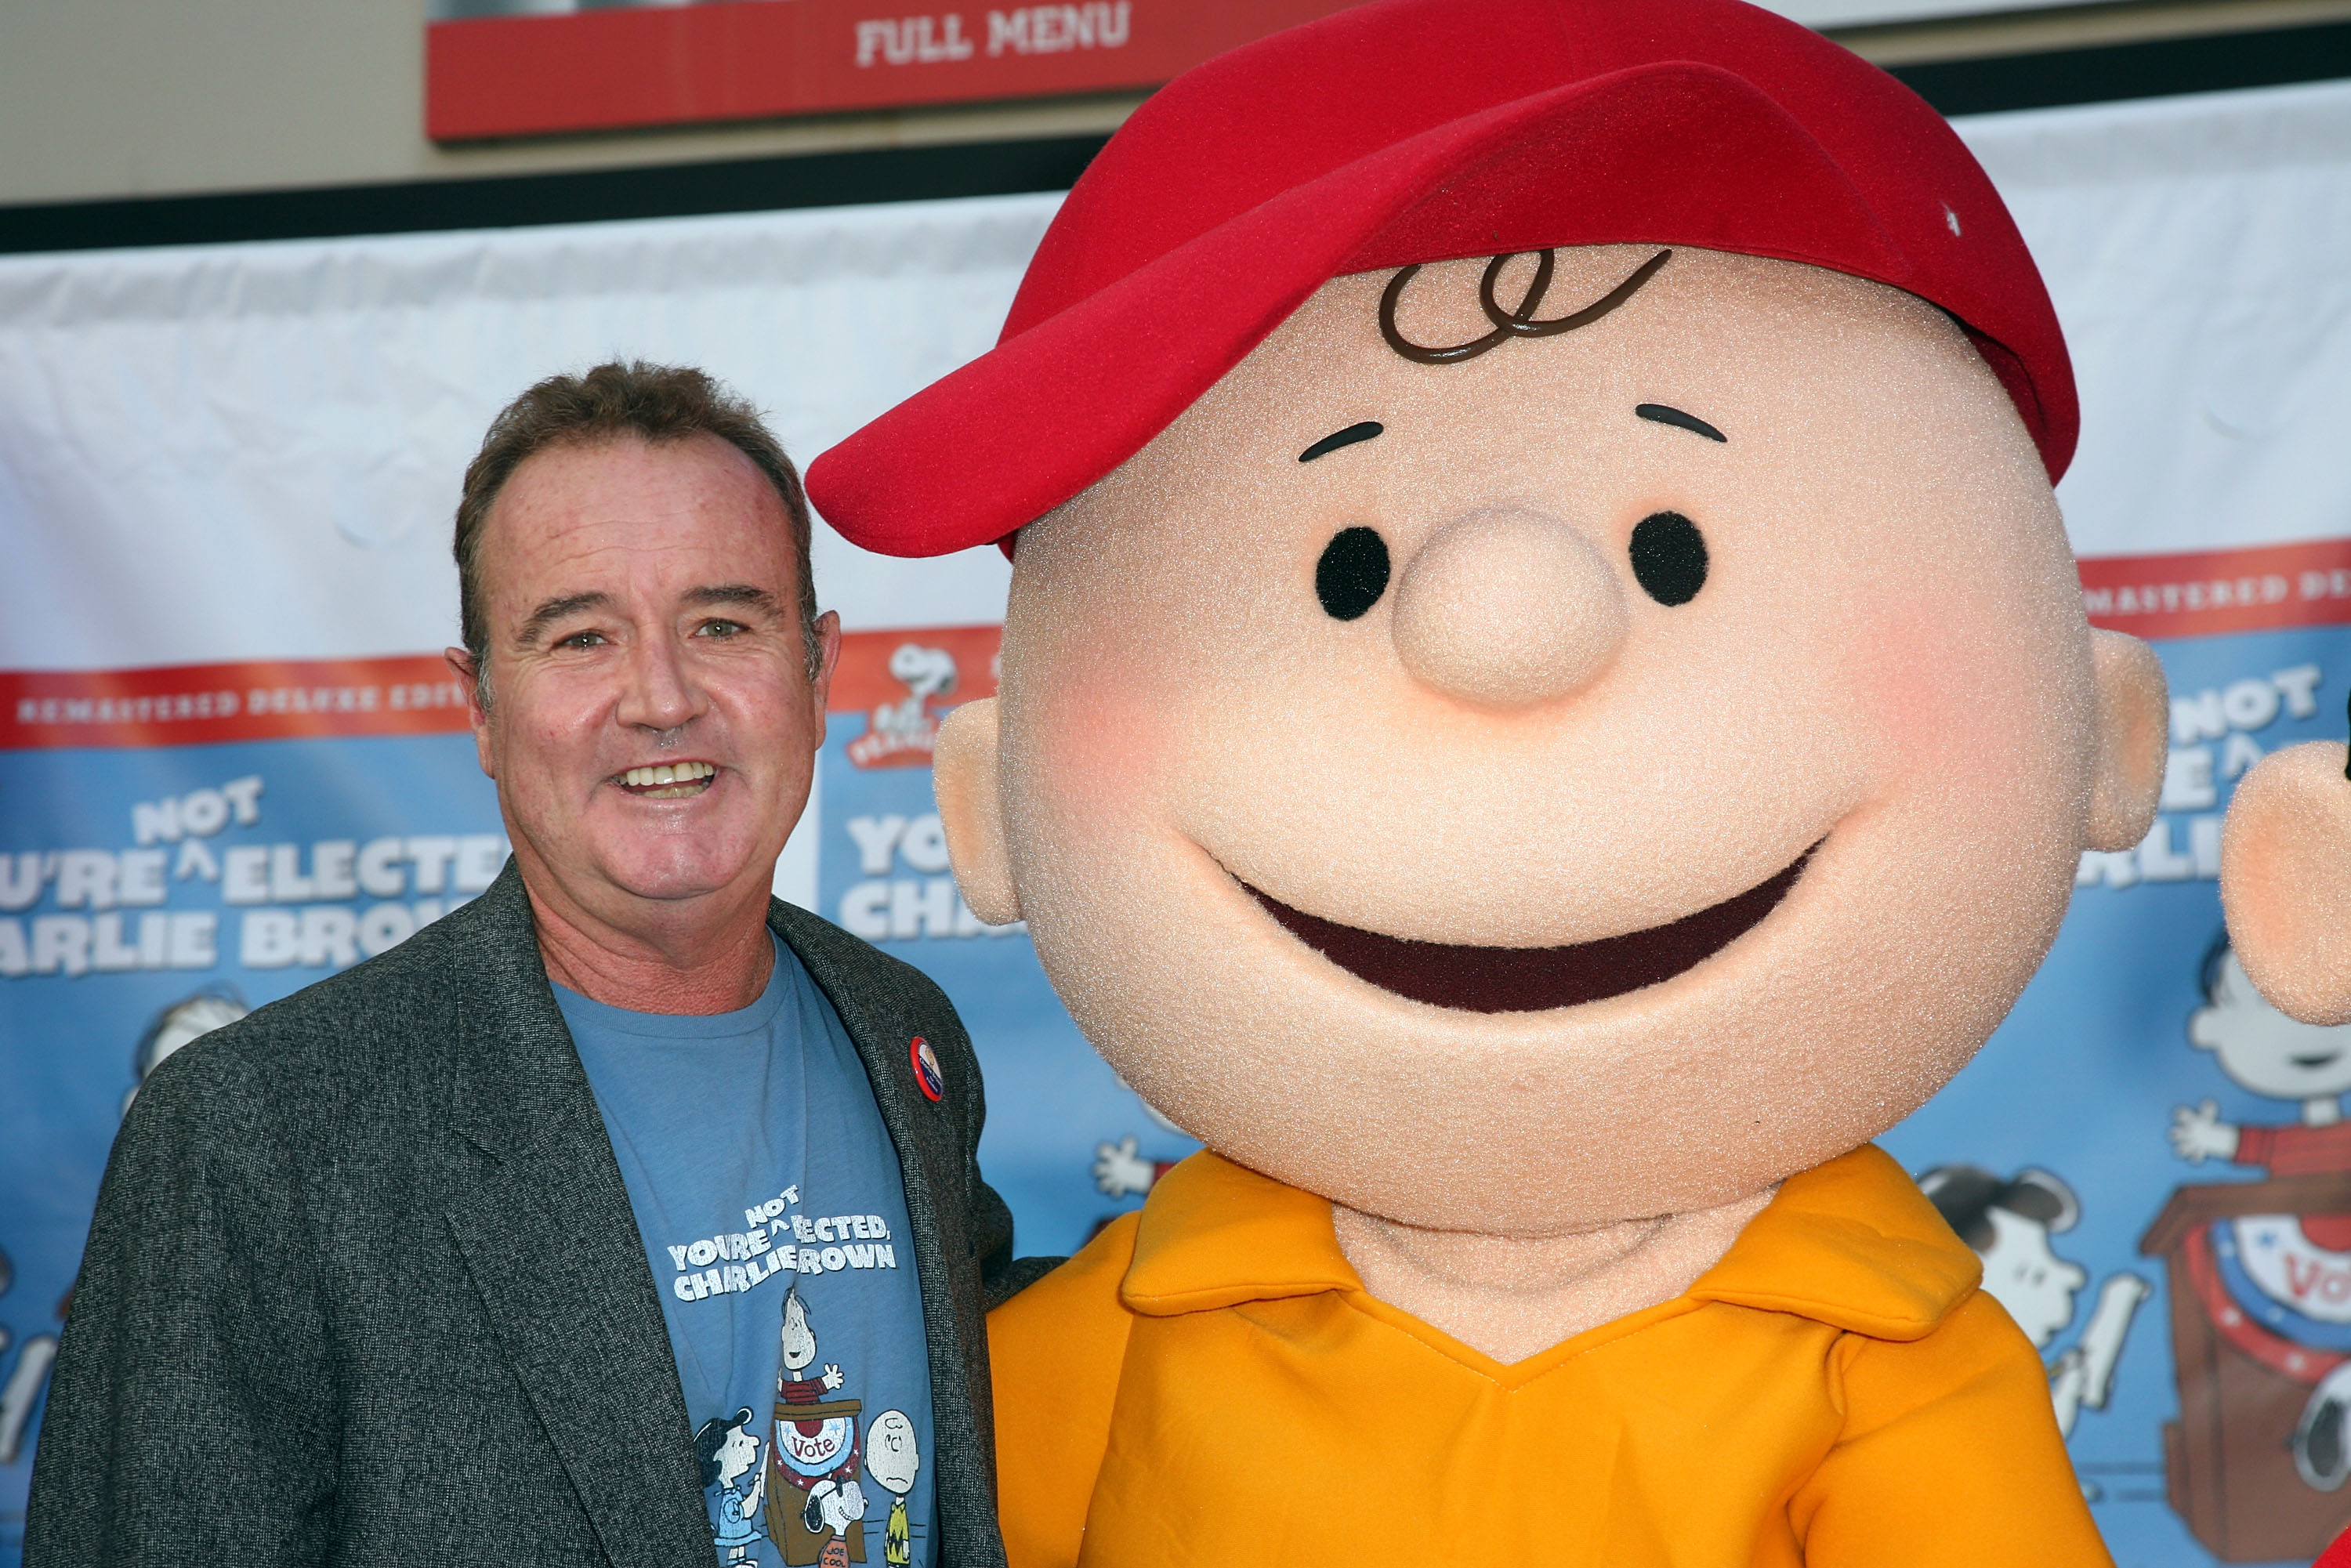 Peter Robbins, wearing a blazer and a Peanuts T-shirt, standing next to a Charlie Brown statue